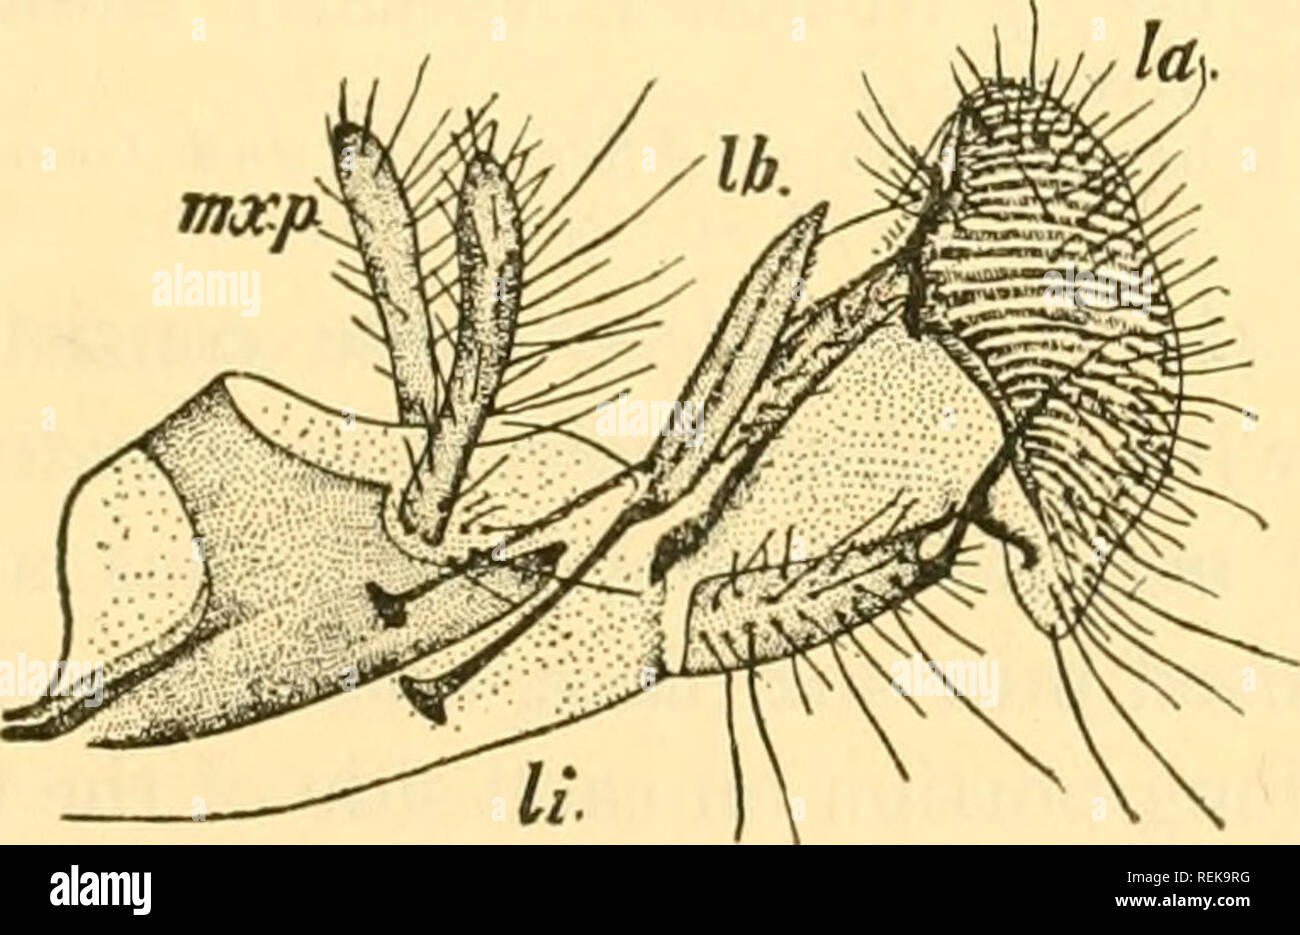 . Class book of economic entomology, with special reference to the economic insects of the northern United States and Canada. Beneficial insects; Insect pests; Insects; Insects. Fig. II.—Mouth-parts of female mosquito (Culex pipiens). A, Dorsal aspect; B, transverse section; C, extremity of maxilla; D, extremity of labrum-epi- pharynx; a., antenna; e., compound eye; h., hypopharynx; I., labrum-epipharynx; li., labium; m., mandible; mx., maxilla; p-, maxillary palpus. {After Folsom and Dimmock.). Fig. 12.—Mouth-parts of the house-fly (Musca domestica). lb., Labrum; tnx.p., maxillary palpi; li., Stock Photo